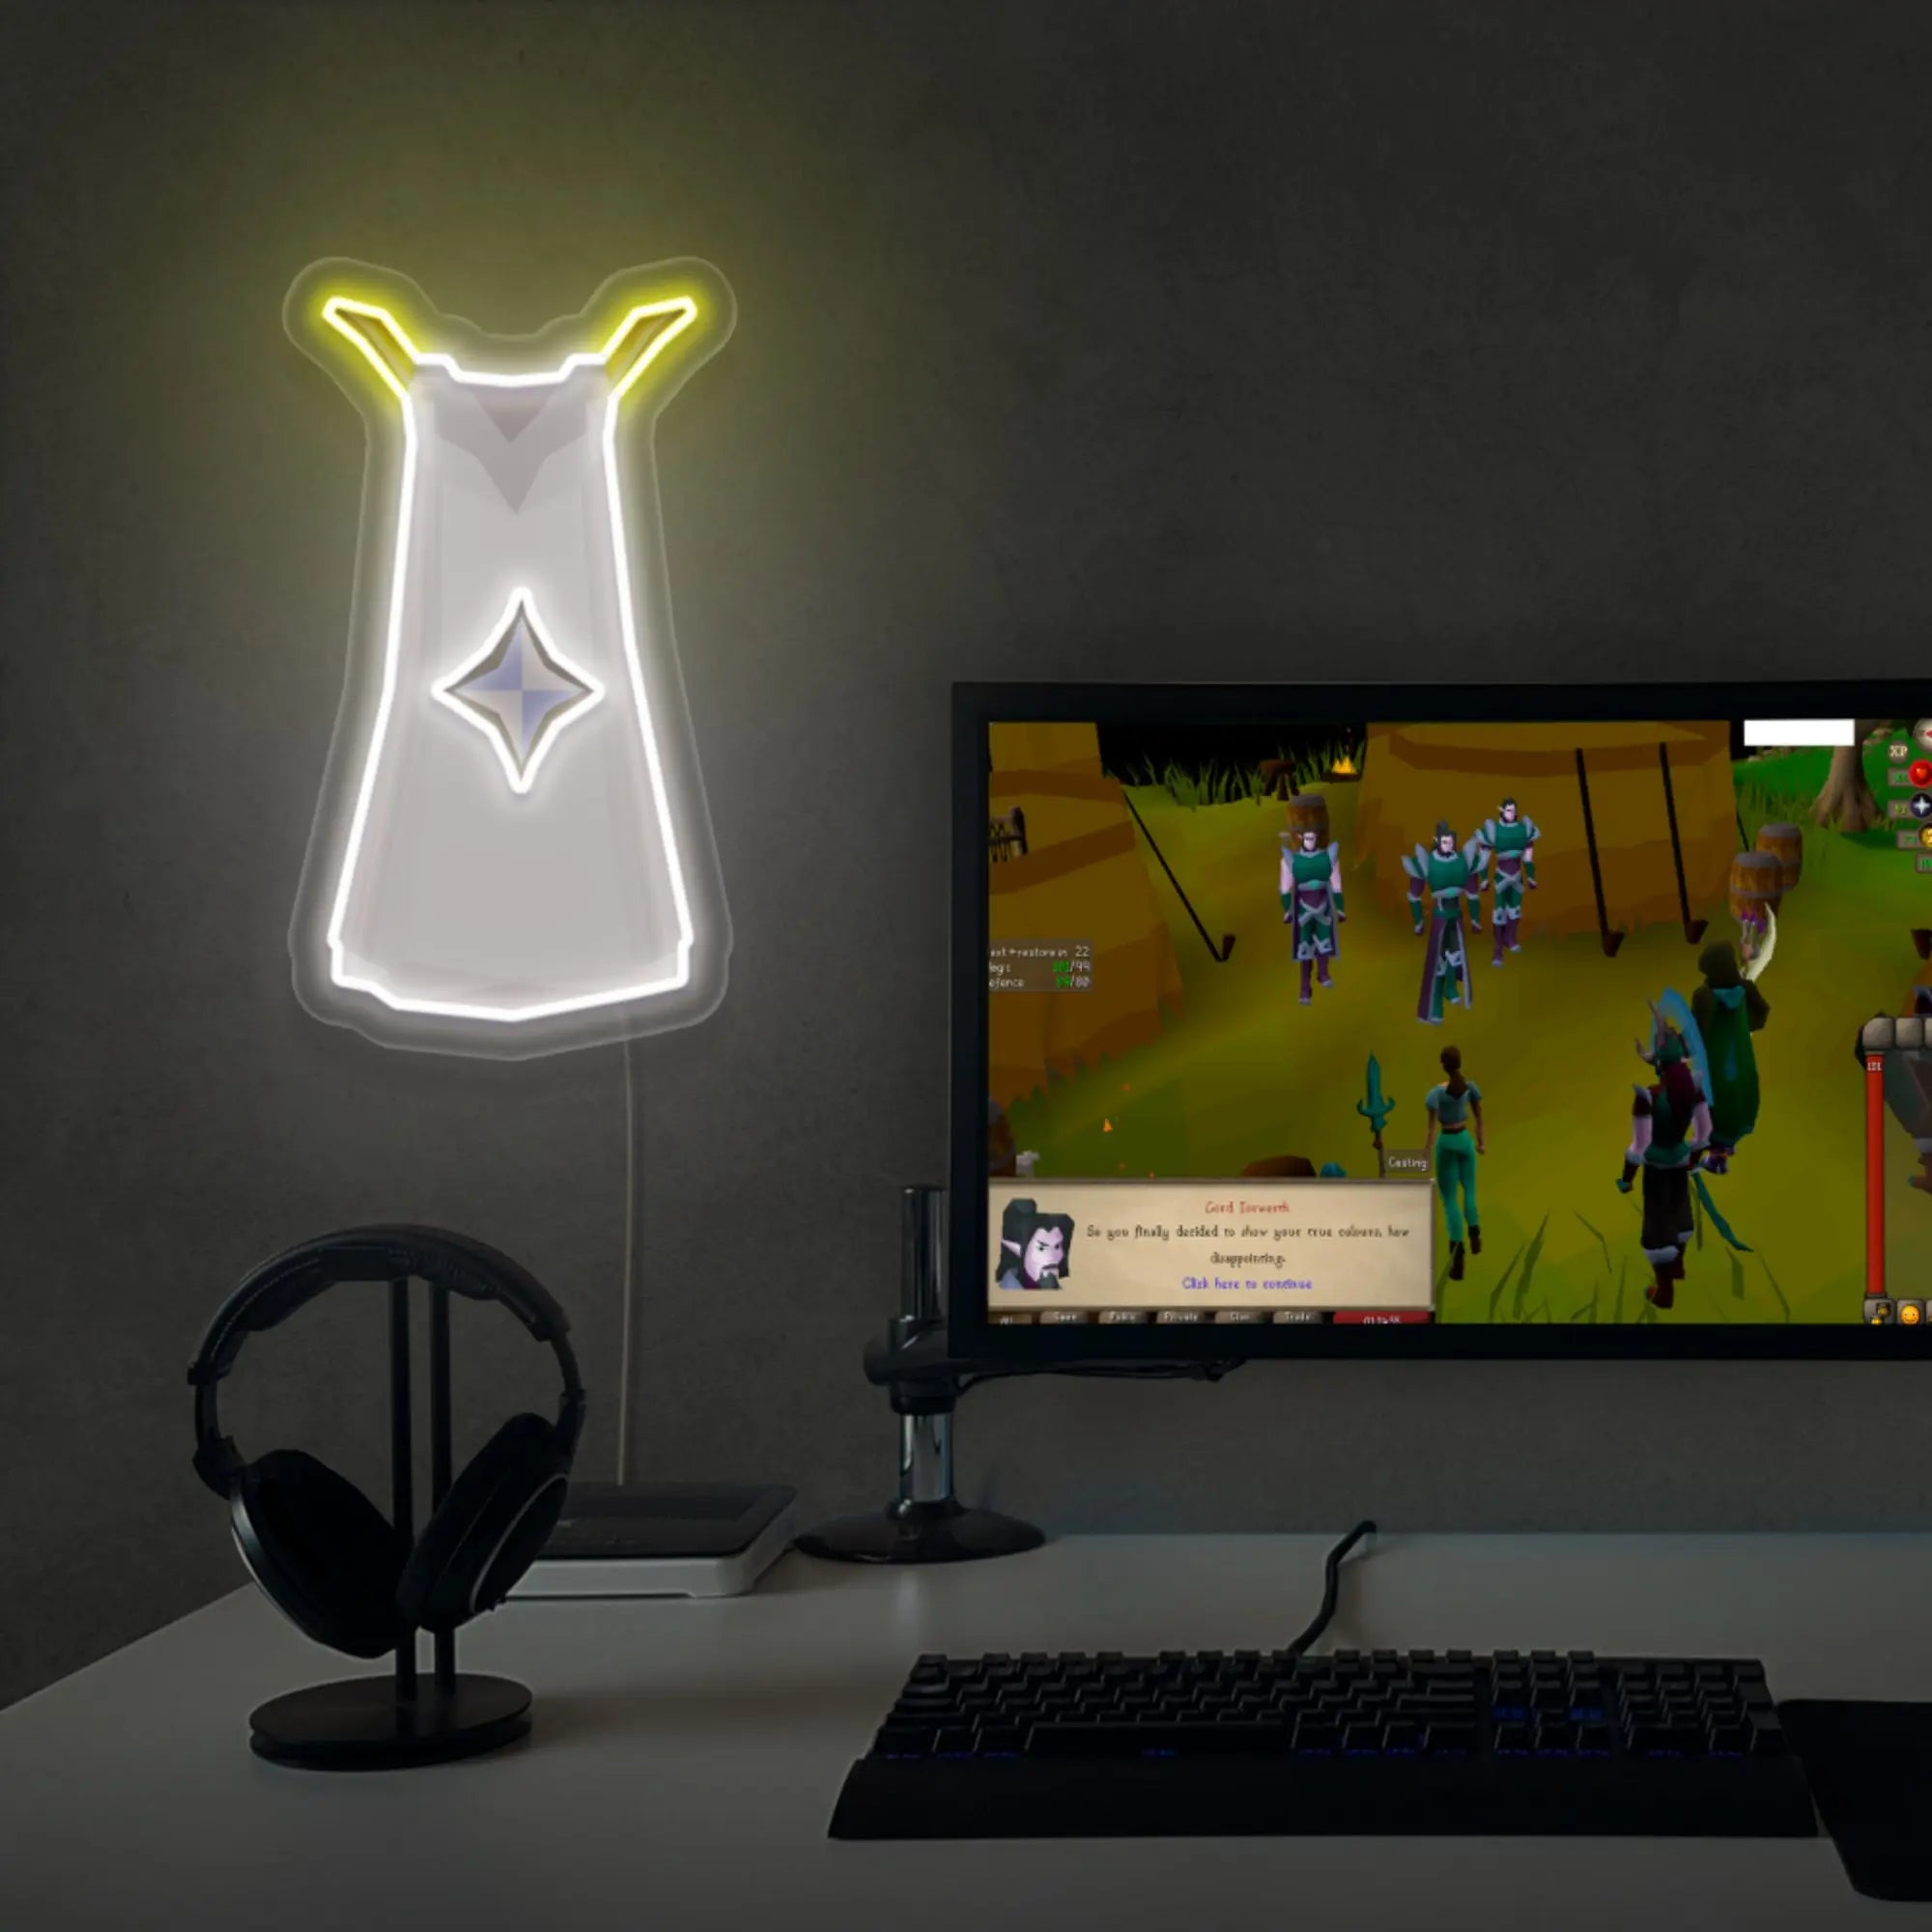 The Runescape Prayer Skillcape LED neon sign proudly sits next to a gaming PC, symbolizing the spiritual journey of players in Old School RuneScape. An emblem of faith and devotion, this LED neon sign adds a touch of reverence and solemnity to any gaming space.